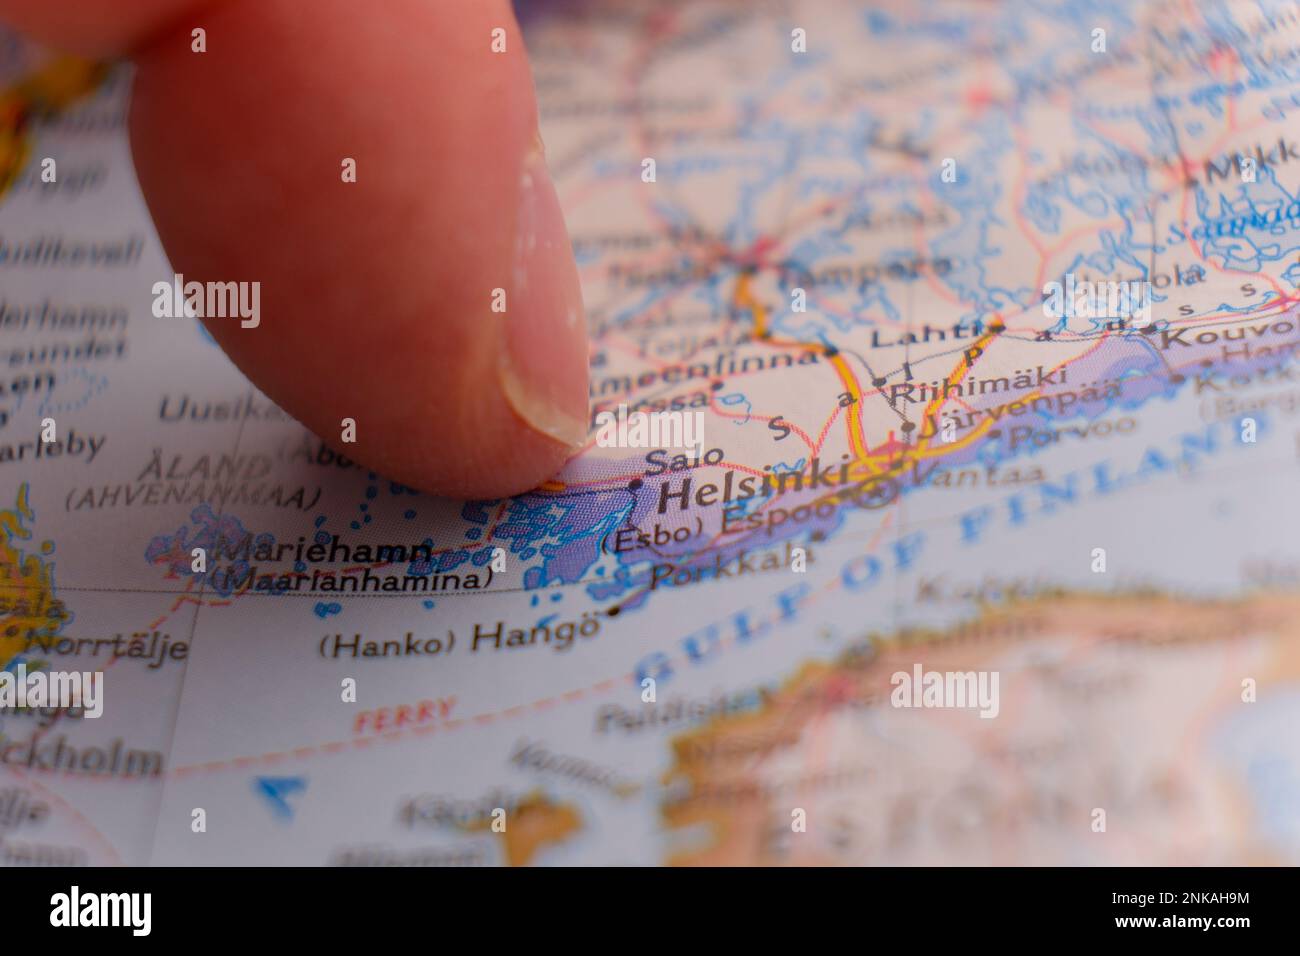 Close up of finger pointing to Helsinki, Finland on colorful map, background blur Stock Photo